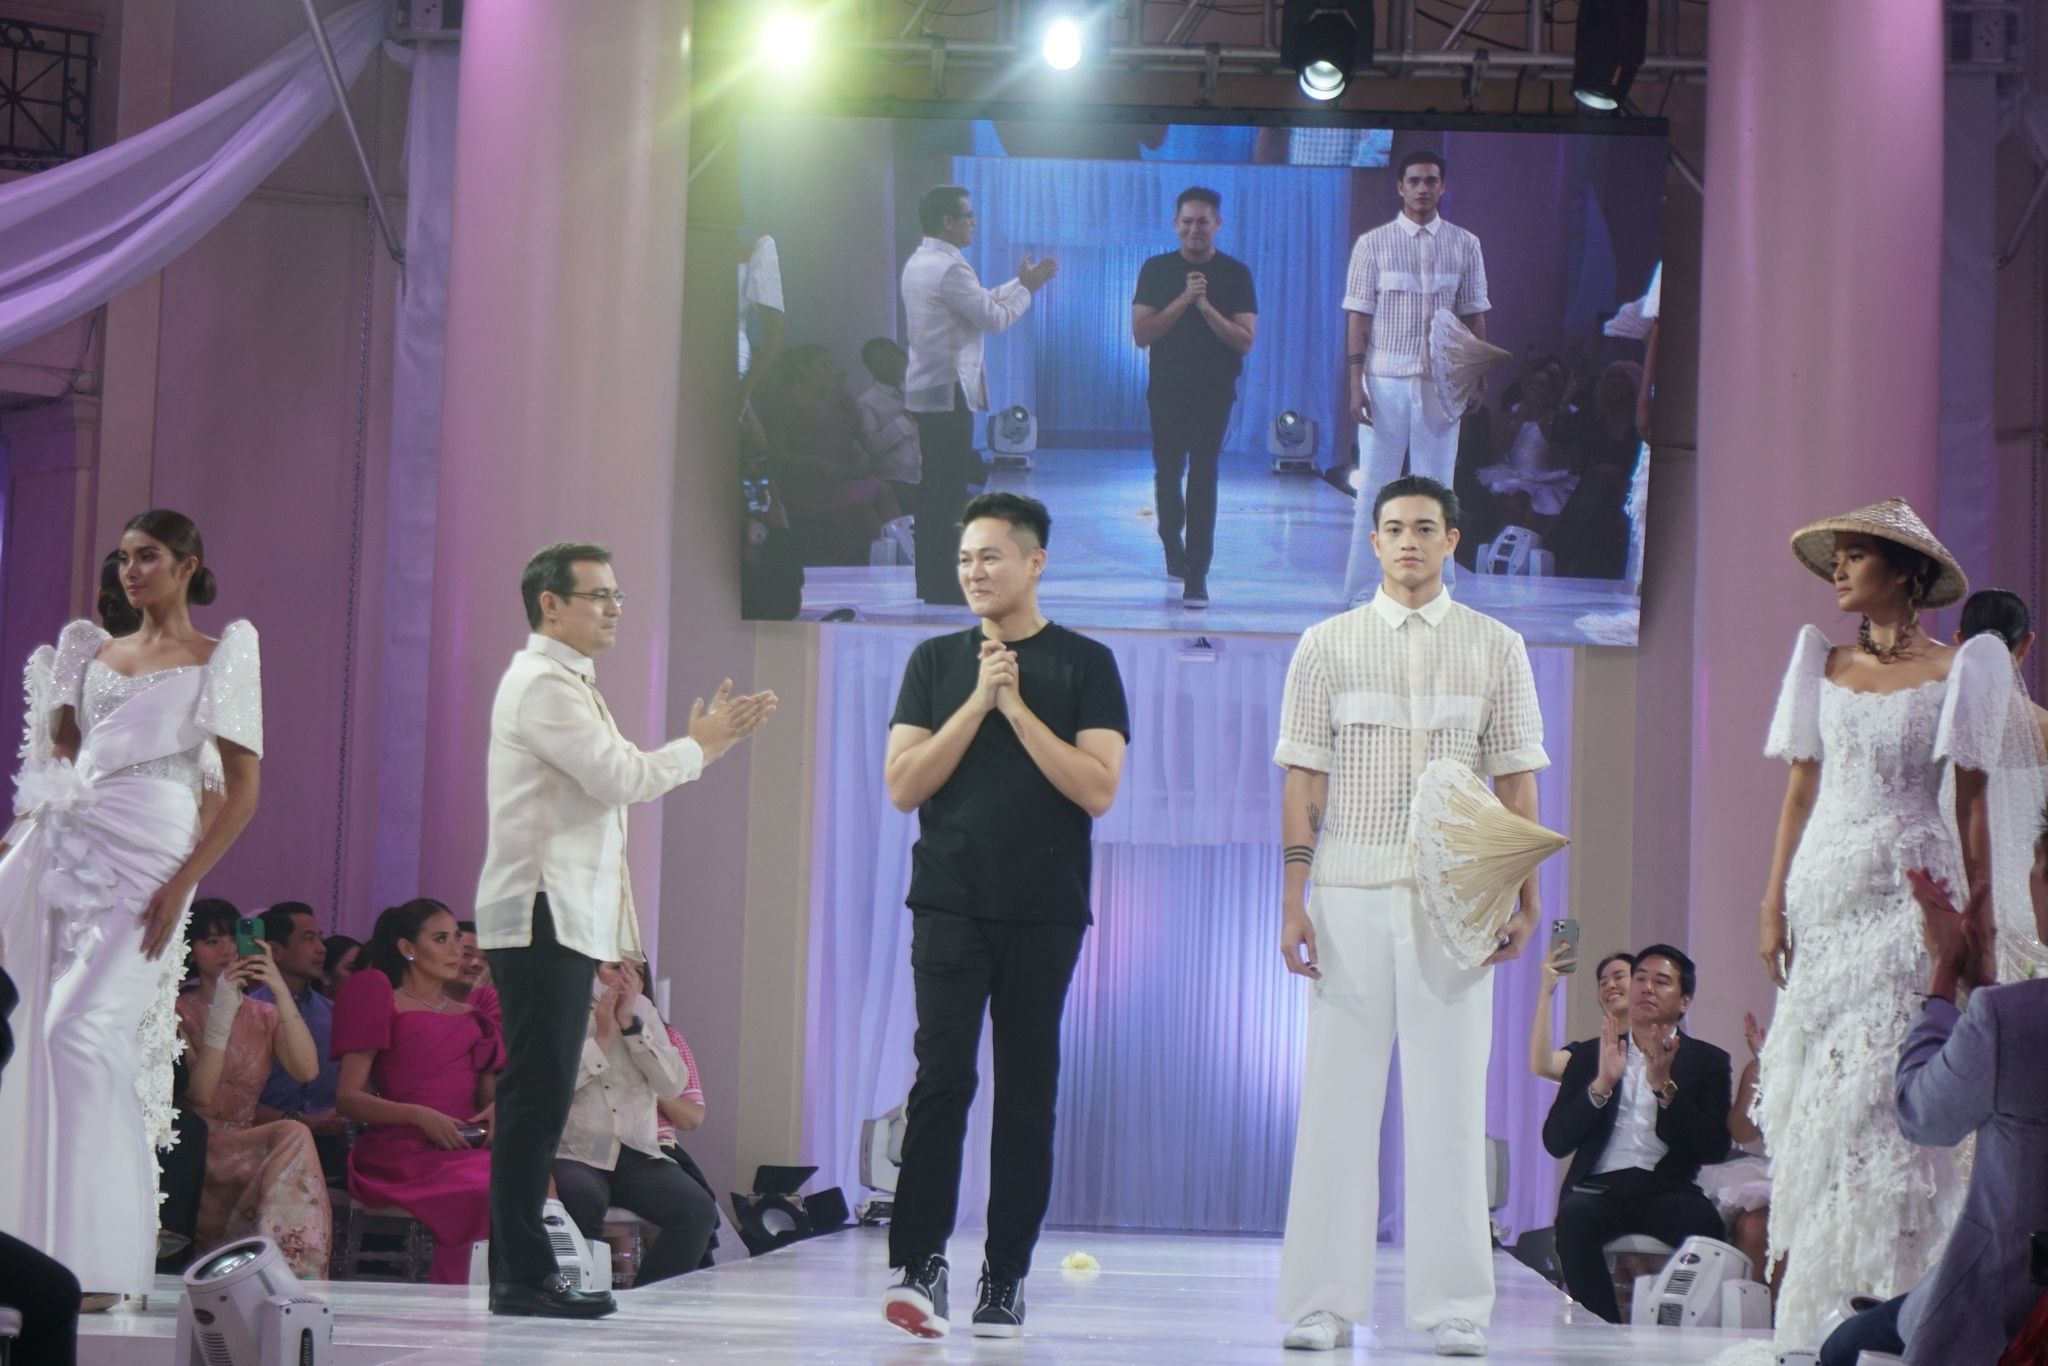 Manila reaffirms itself as the country’s once and future fashion capital